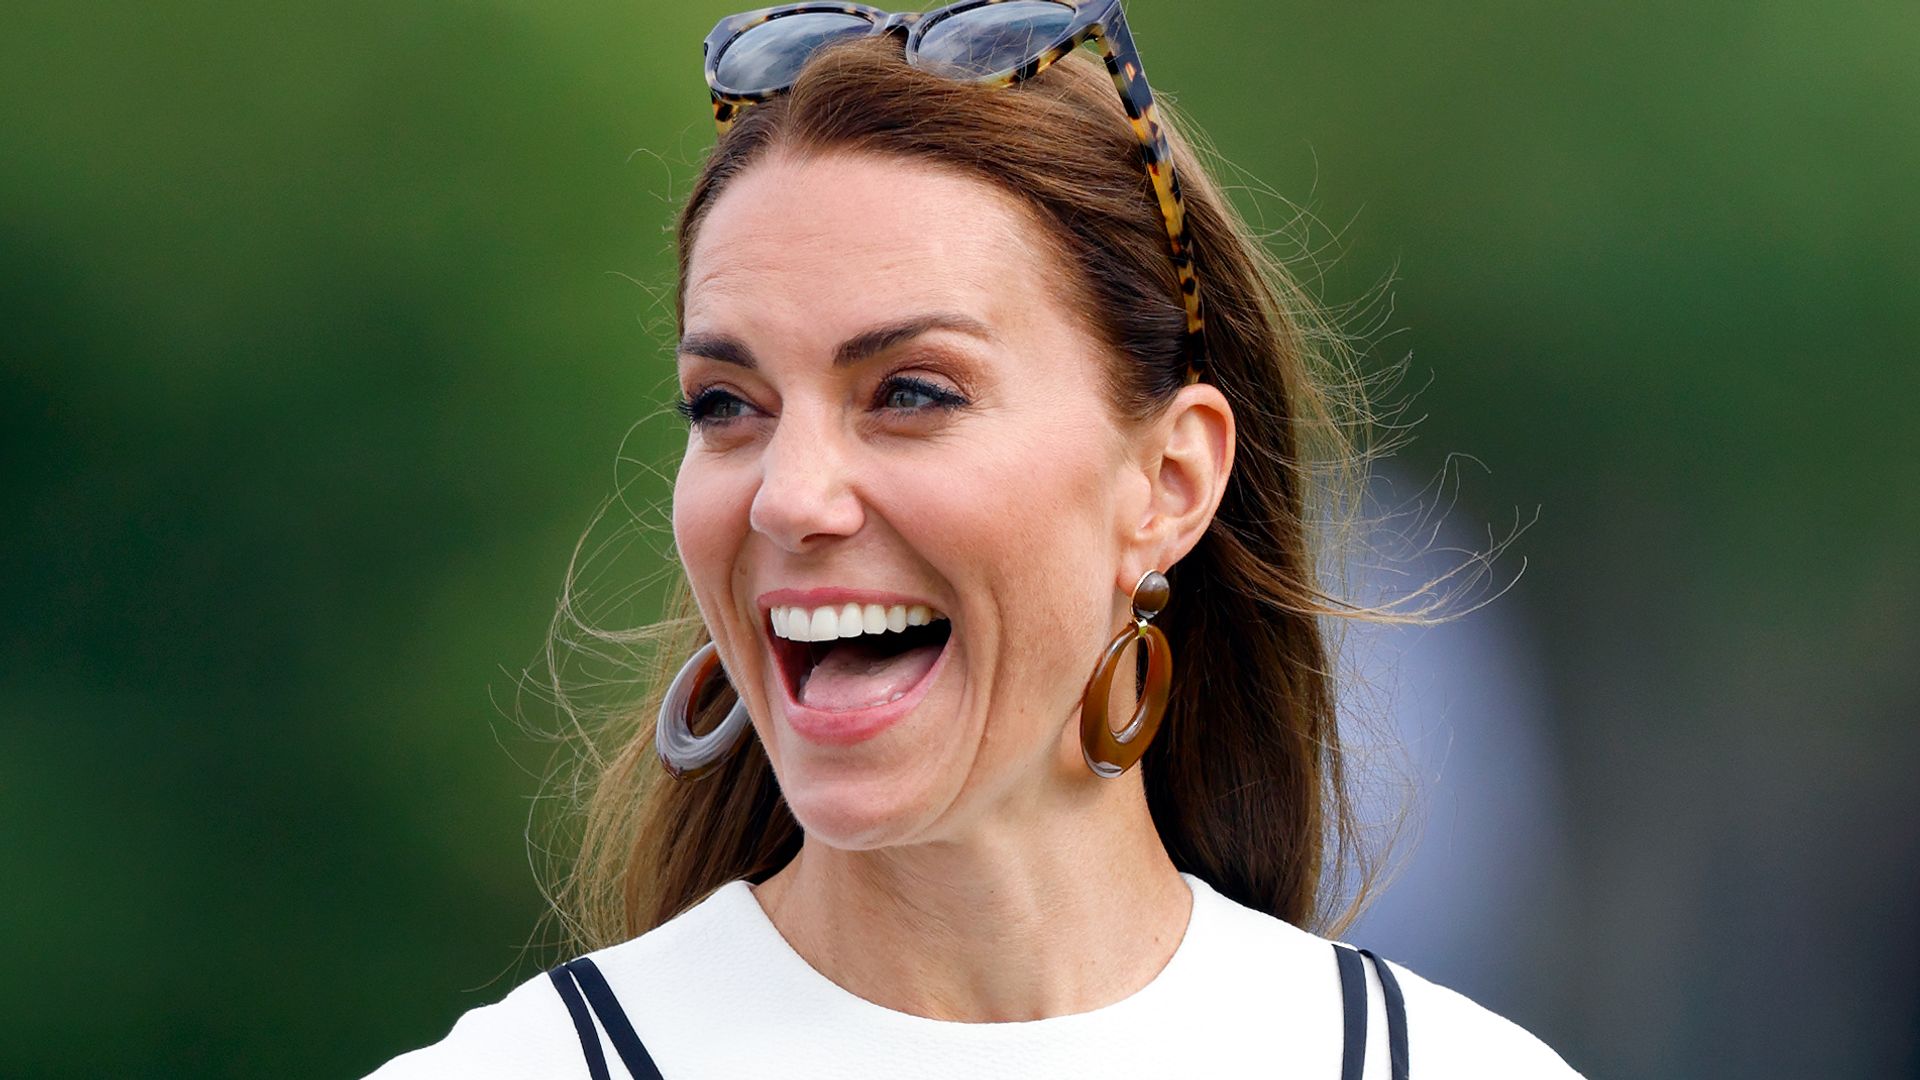 Catherine, Duchess of Cambridge attends the Out-Sourcing Inc. Royal Charity Polo Cup at Guards Polo Club, Flemish Farm on July 6, 2022 in Windsor, England.